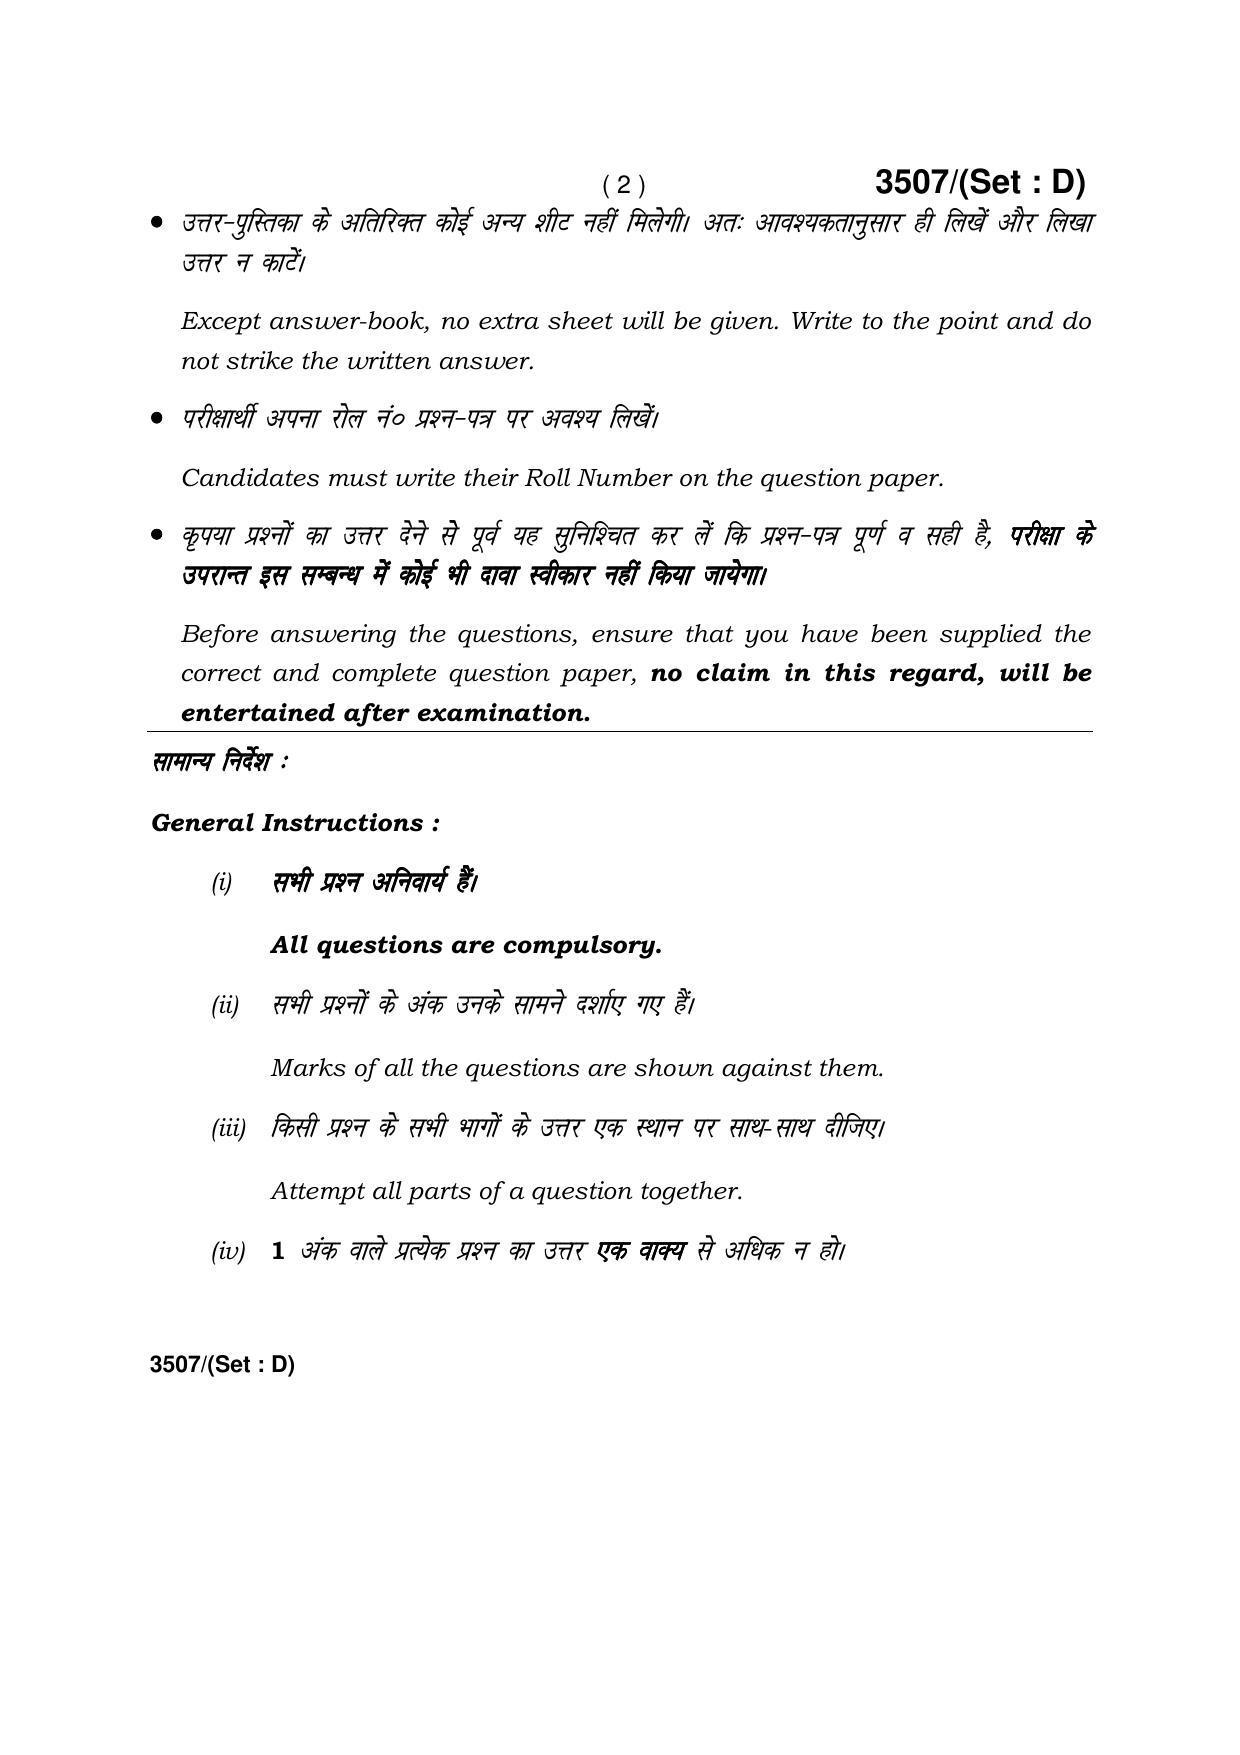 Haryana Board HBSE Class 10 Social Science -D 2018 Question Paper - Page 2